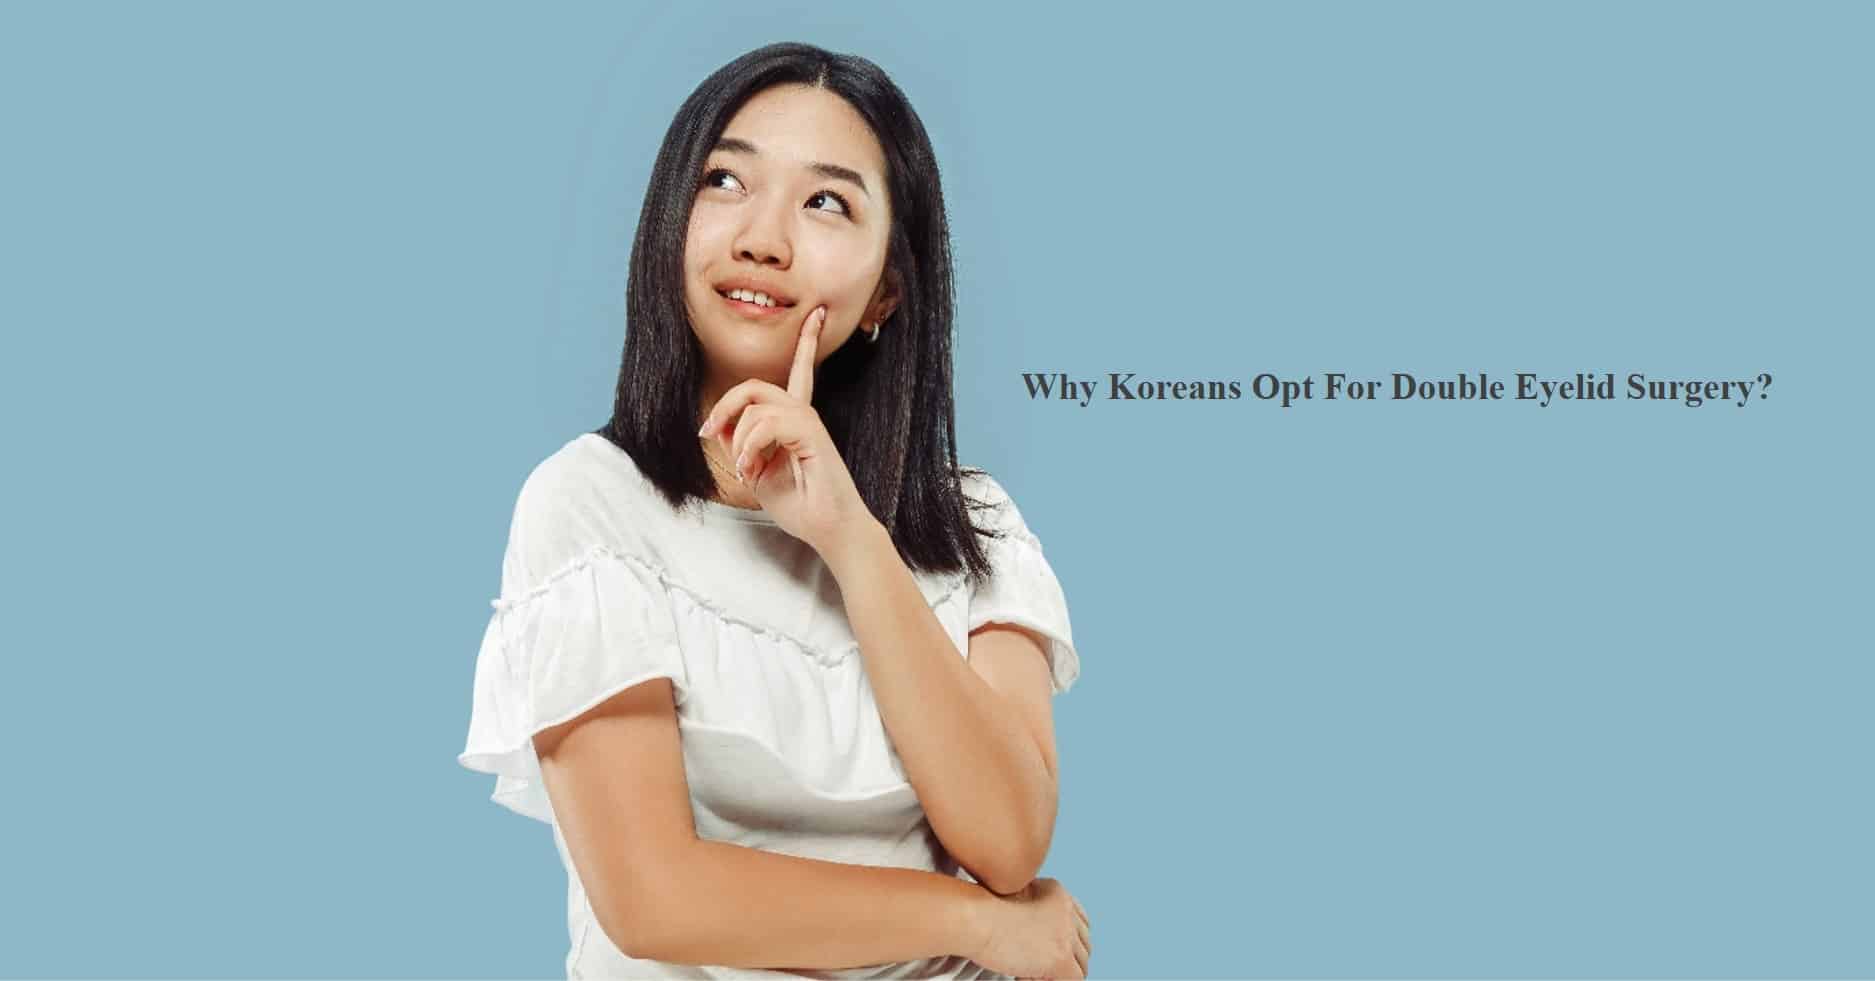 Why Koreans Opt For Double Eyelid Surgery Dream Plastic Surgery